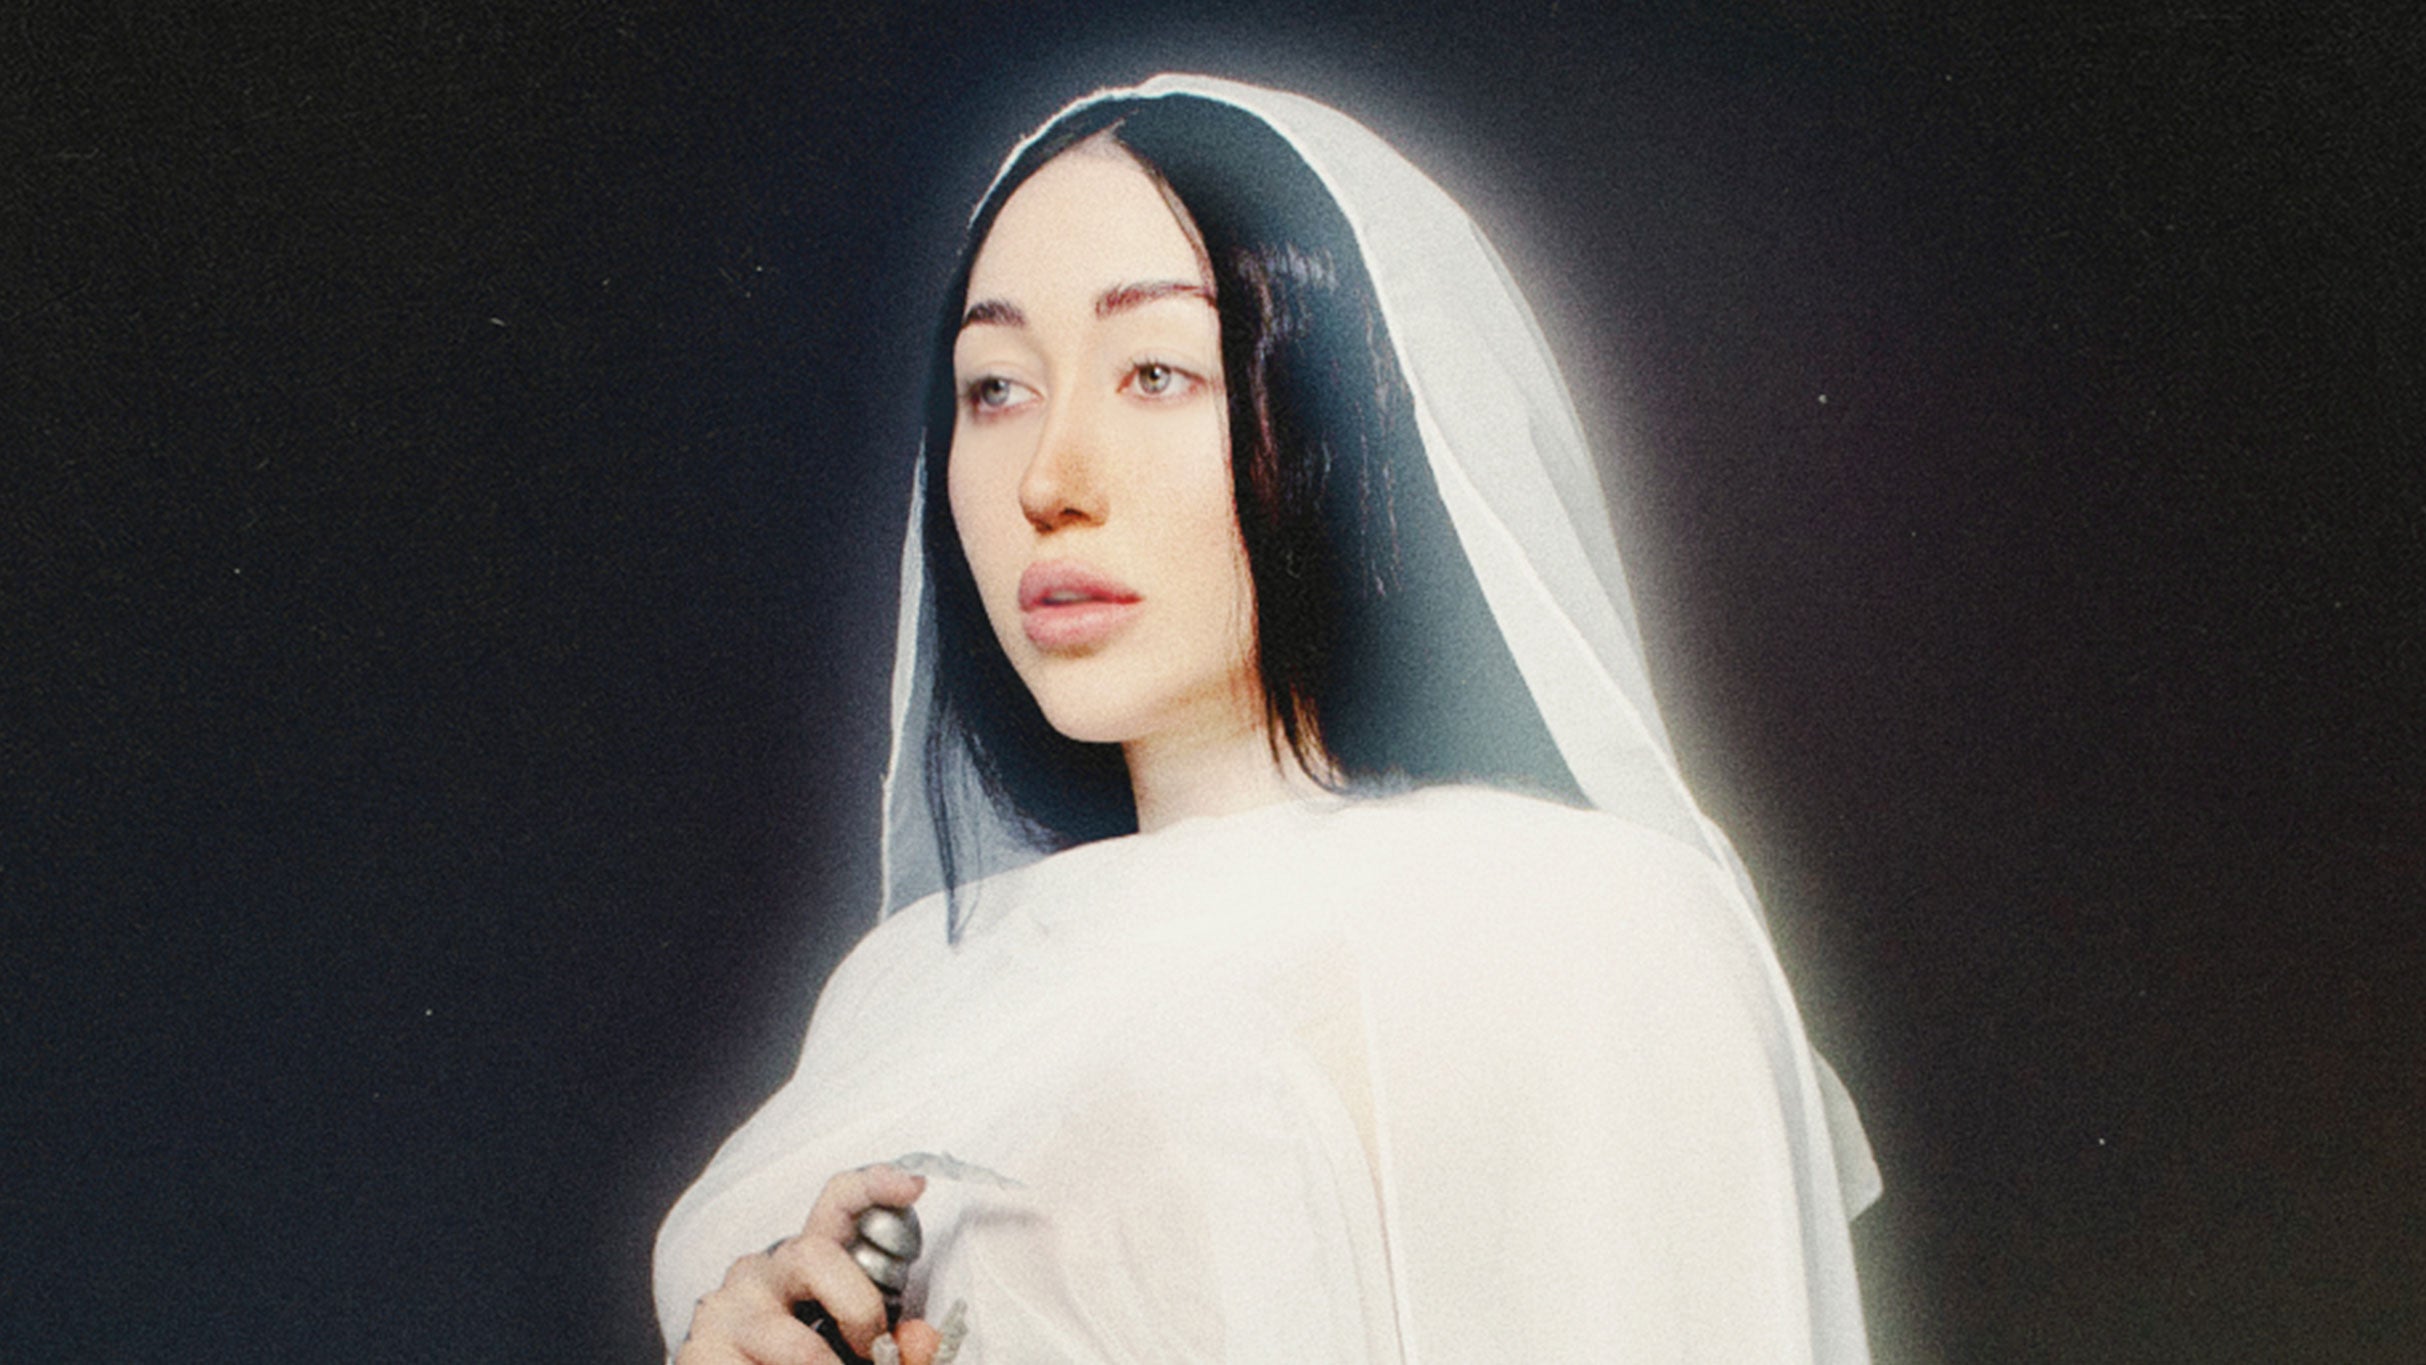 Noah Cyrus - The Hardest Part Tour in Chicago promo photo for Live Nation presale offer code